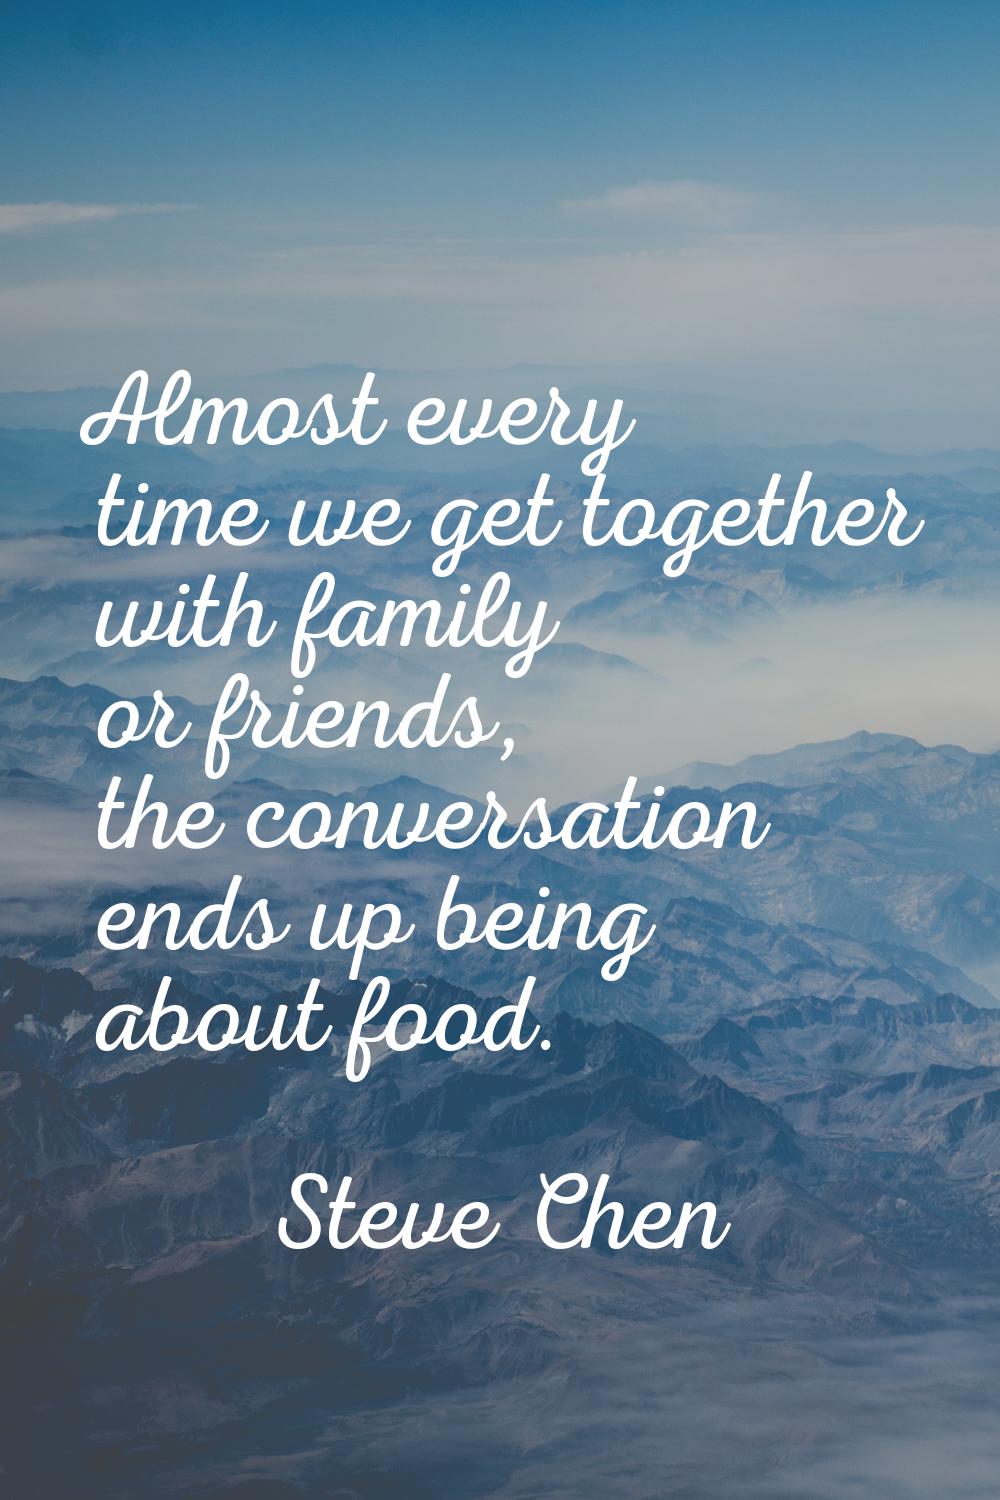 Almost every time we get together with family or friends, the conversation ends up being about food